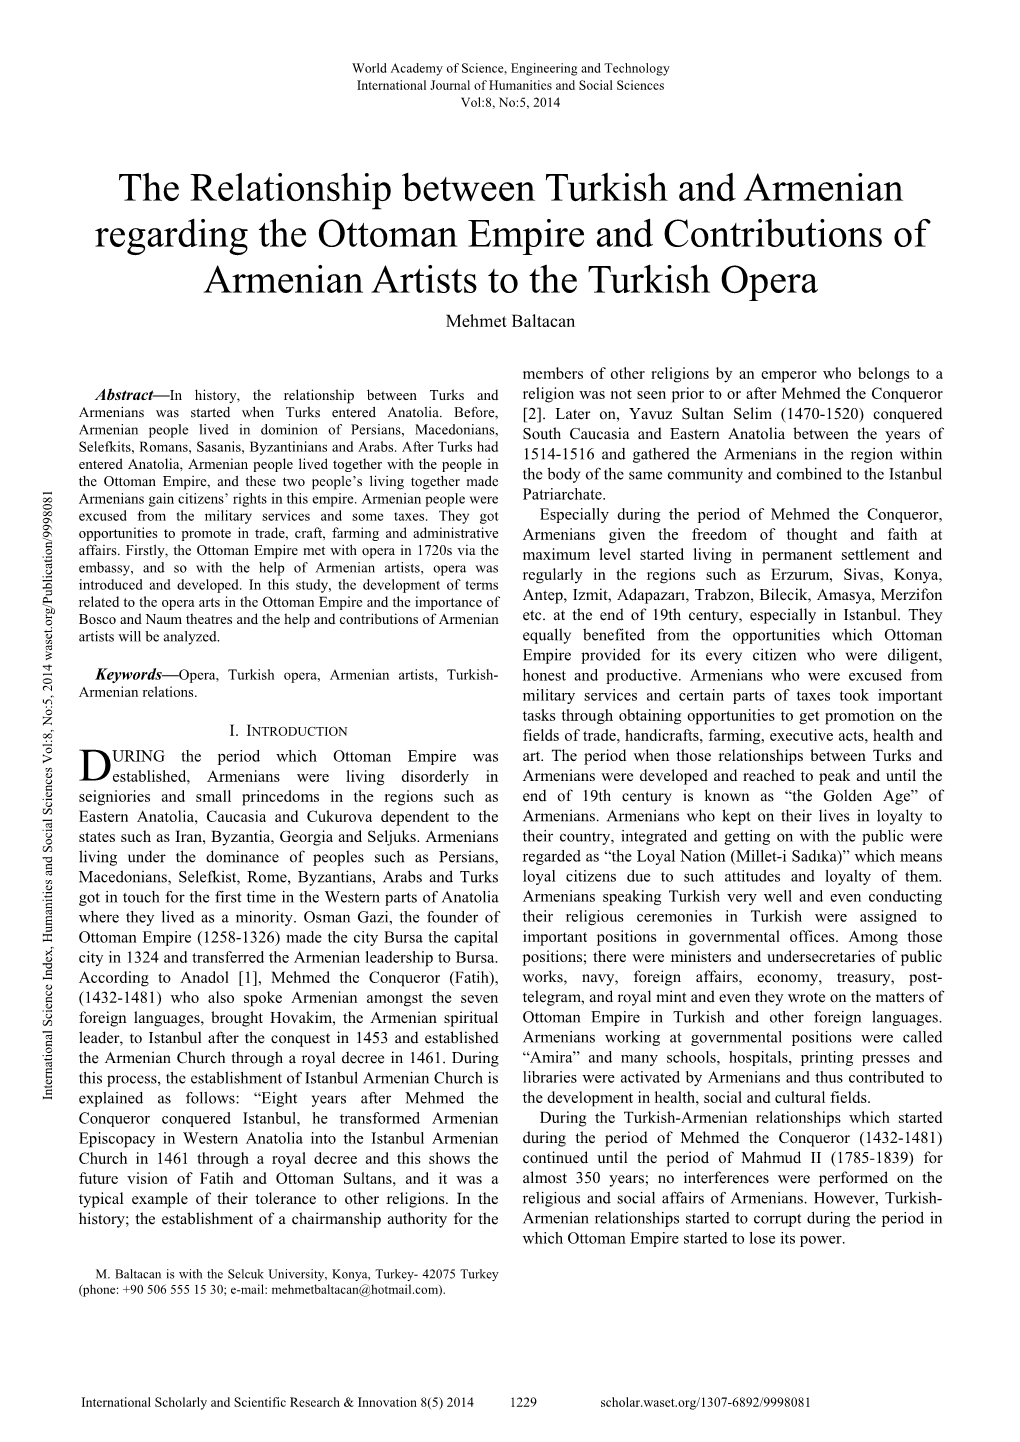 The Relationship Between Turkish and Armenian Regarding the Ottoman Empire and Contributions of Armenian Artists to the Turkish Opera Mehmet Baltacan